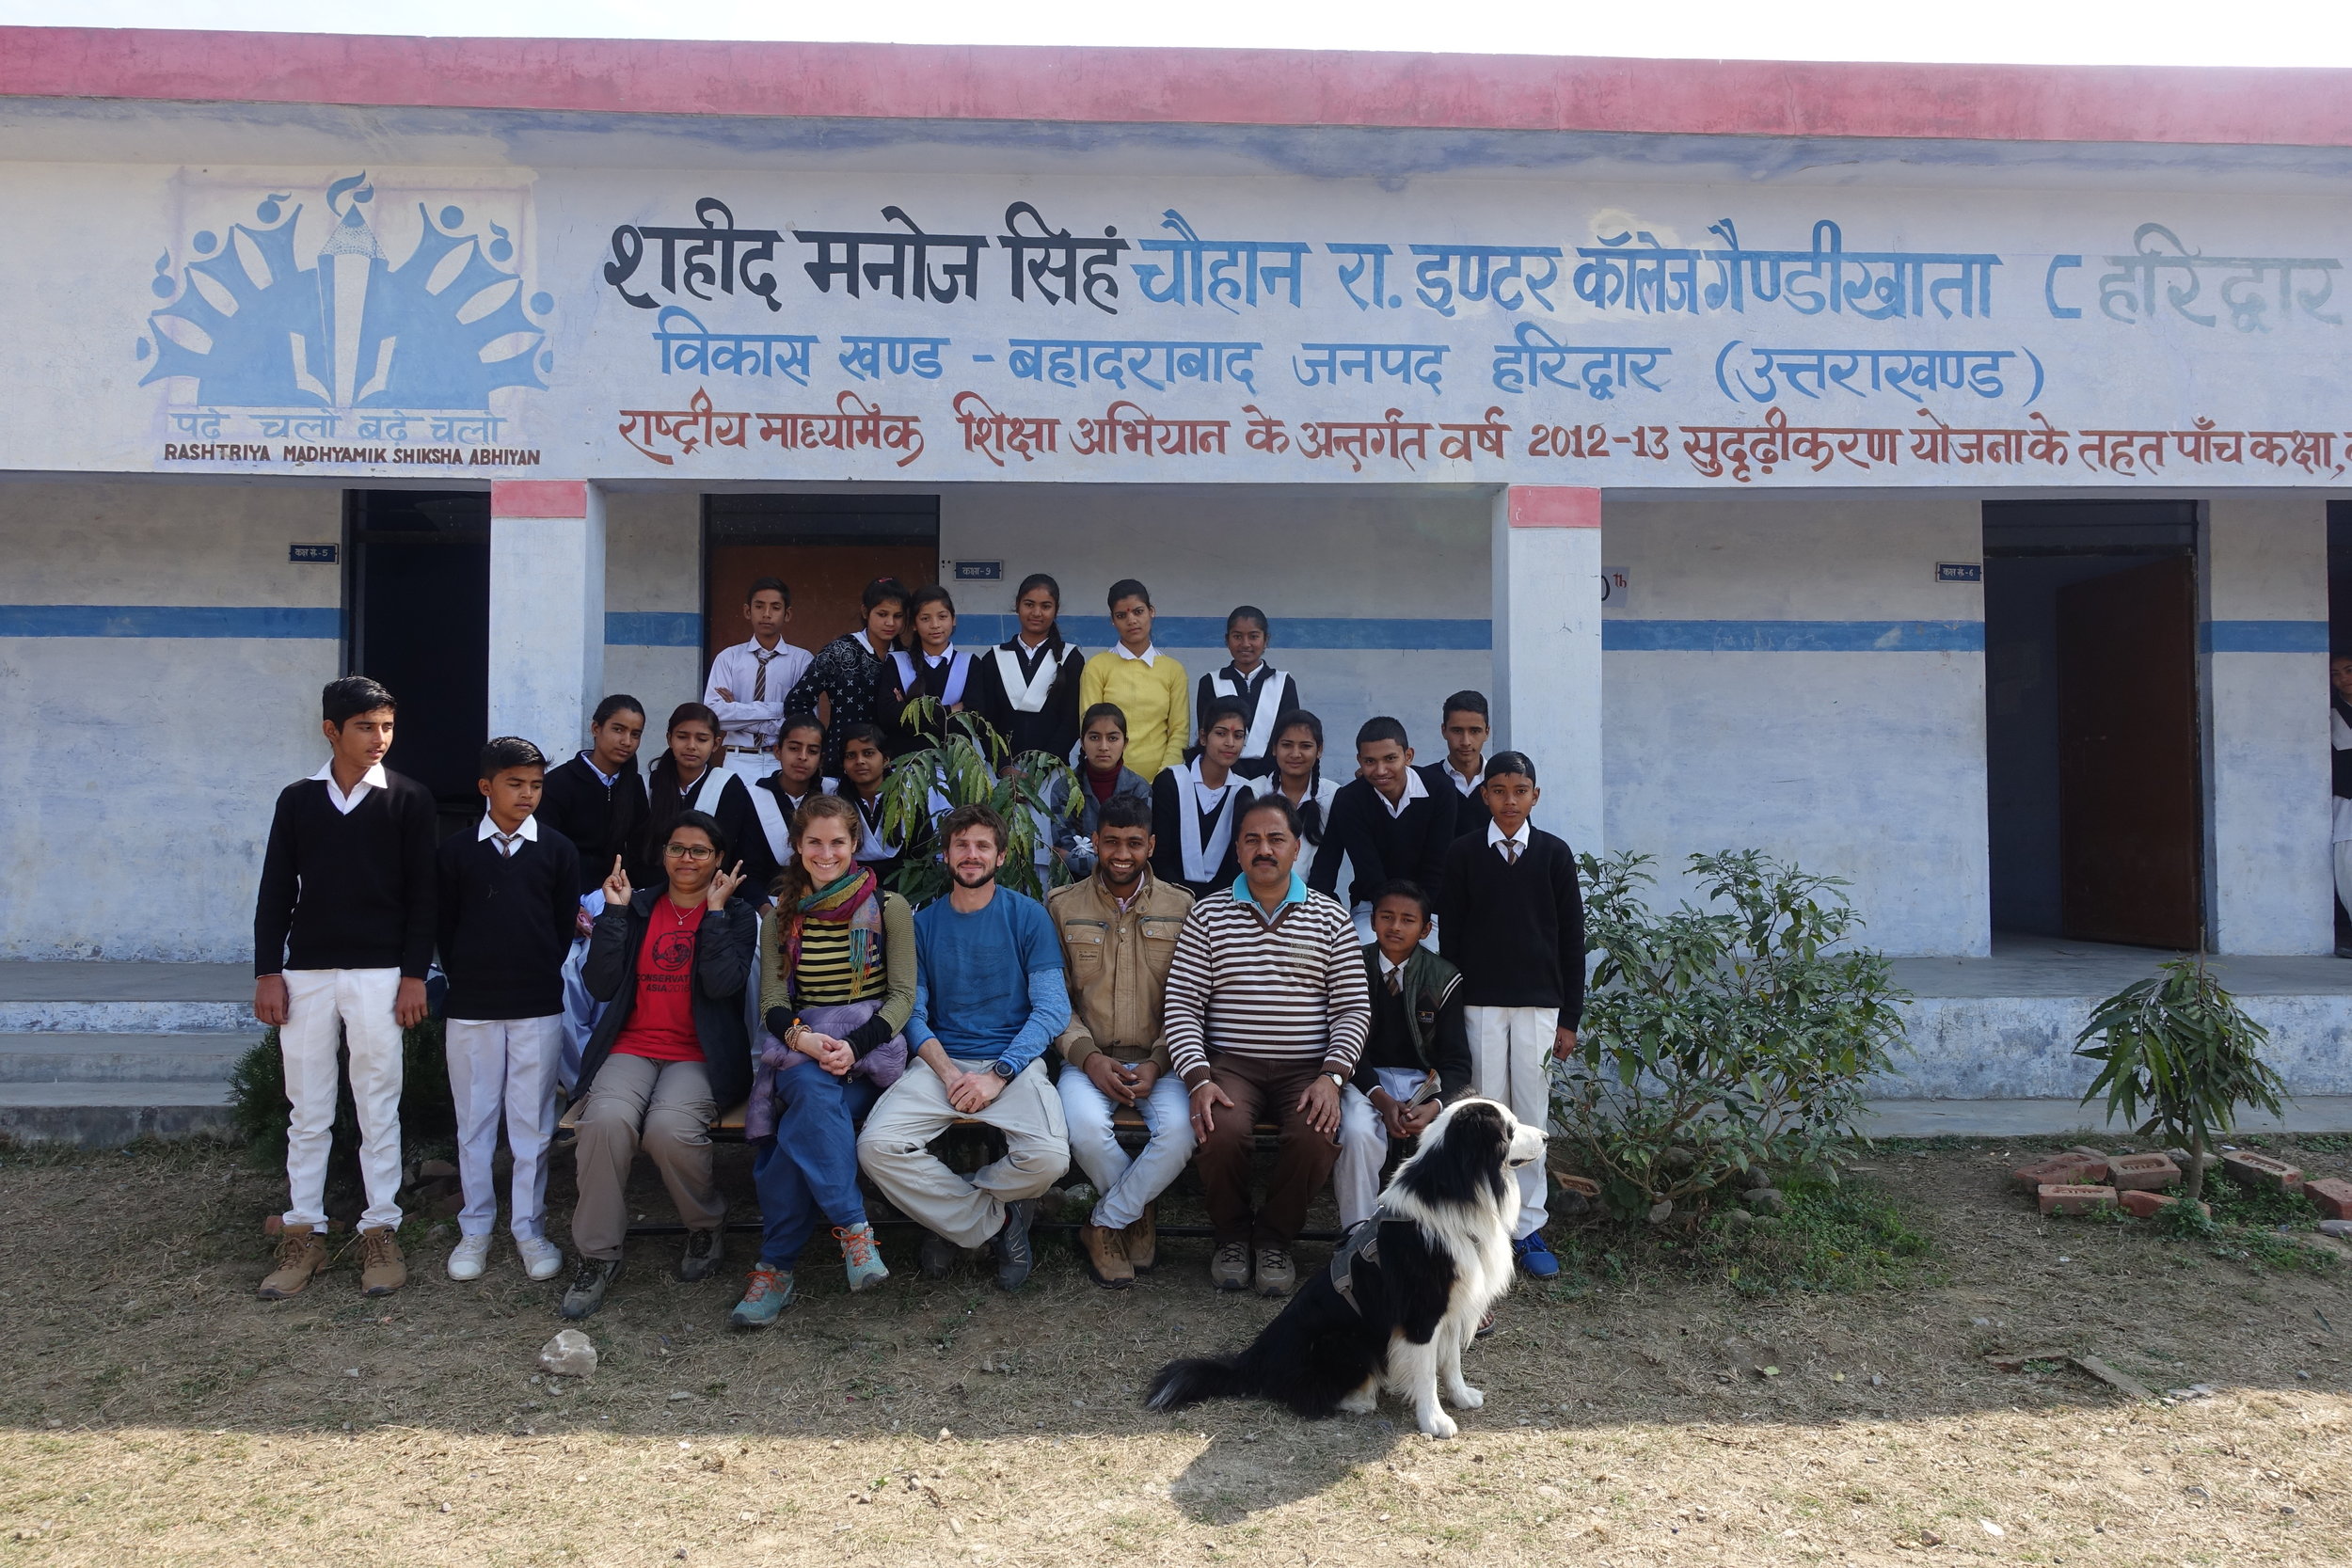 One of our school visits in a village of rural Uttarakhand.